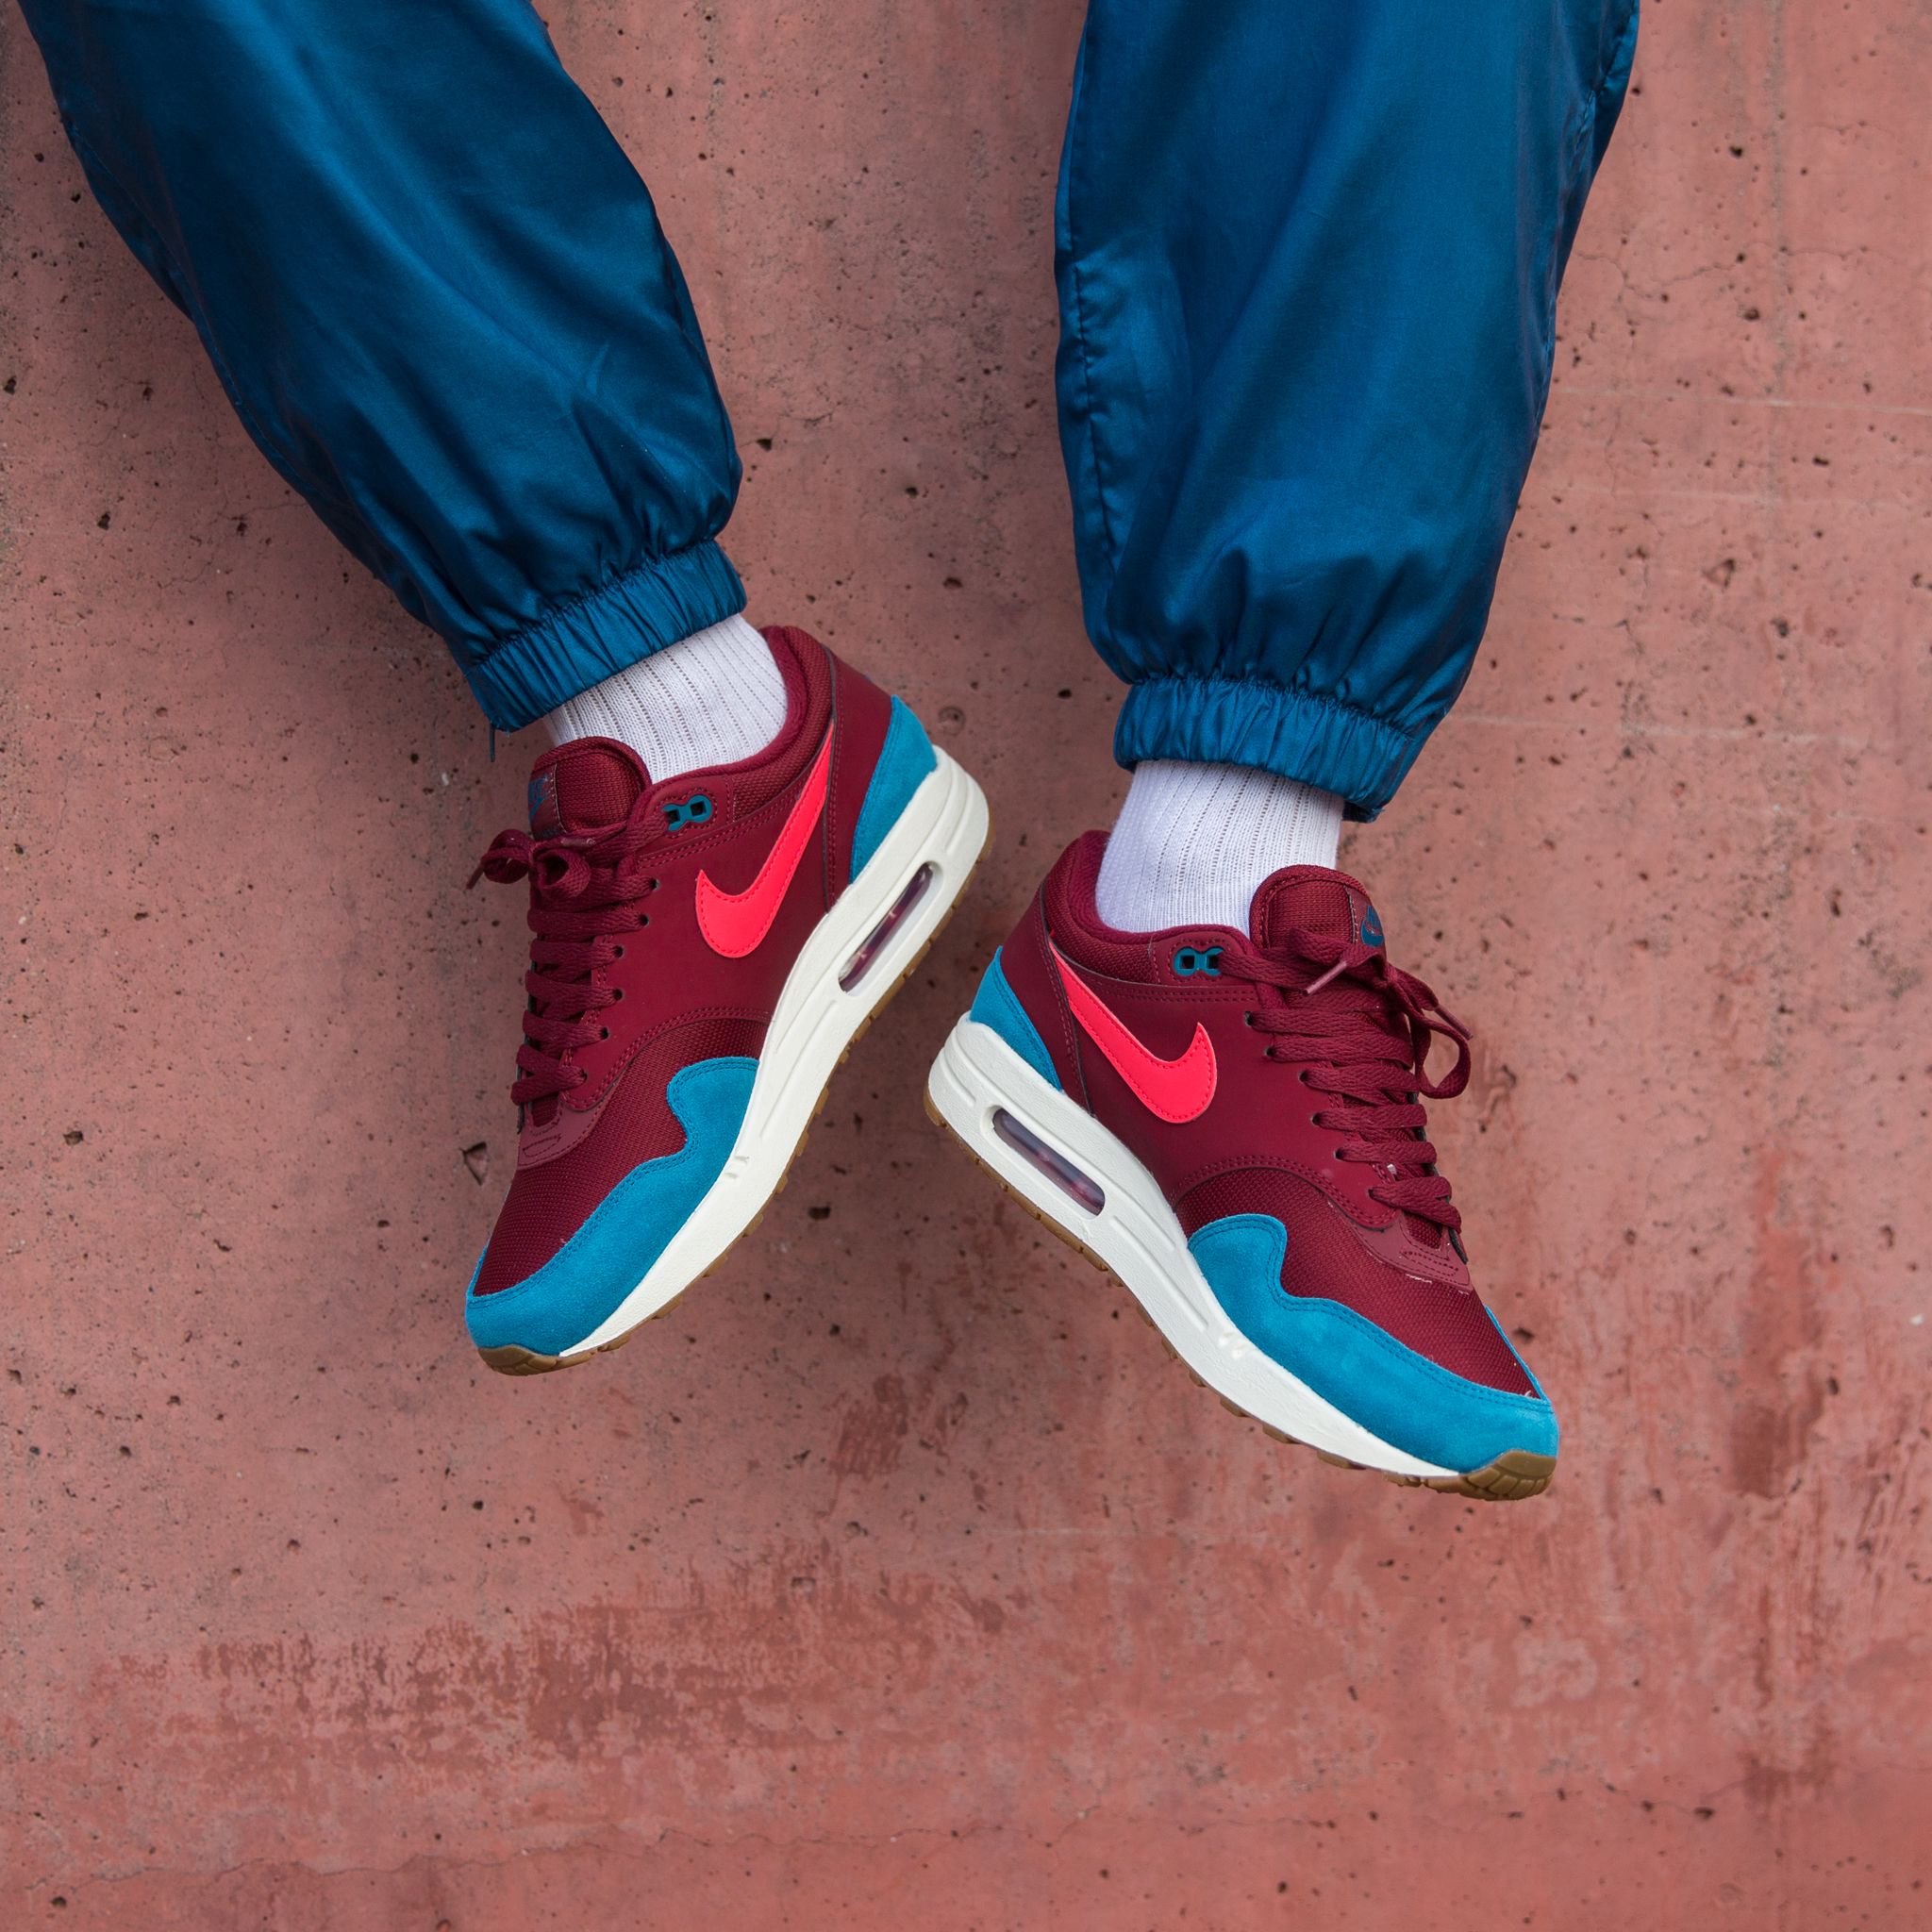 Sonrisa inteligente escena Titolo on Twitter: "NEW IN ! Nike Air Max 1 - Team Red/Red Orbit-Green Abyss -White SHOP HERE : https://t.co/rCAqZM2Vkk https://t.co/Y6Bjm20BYB" /  Twitter